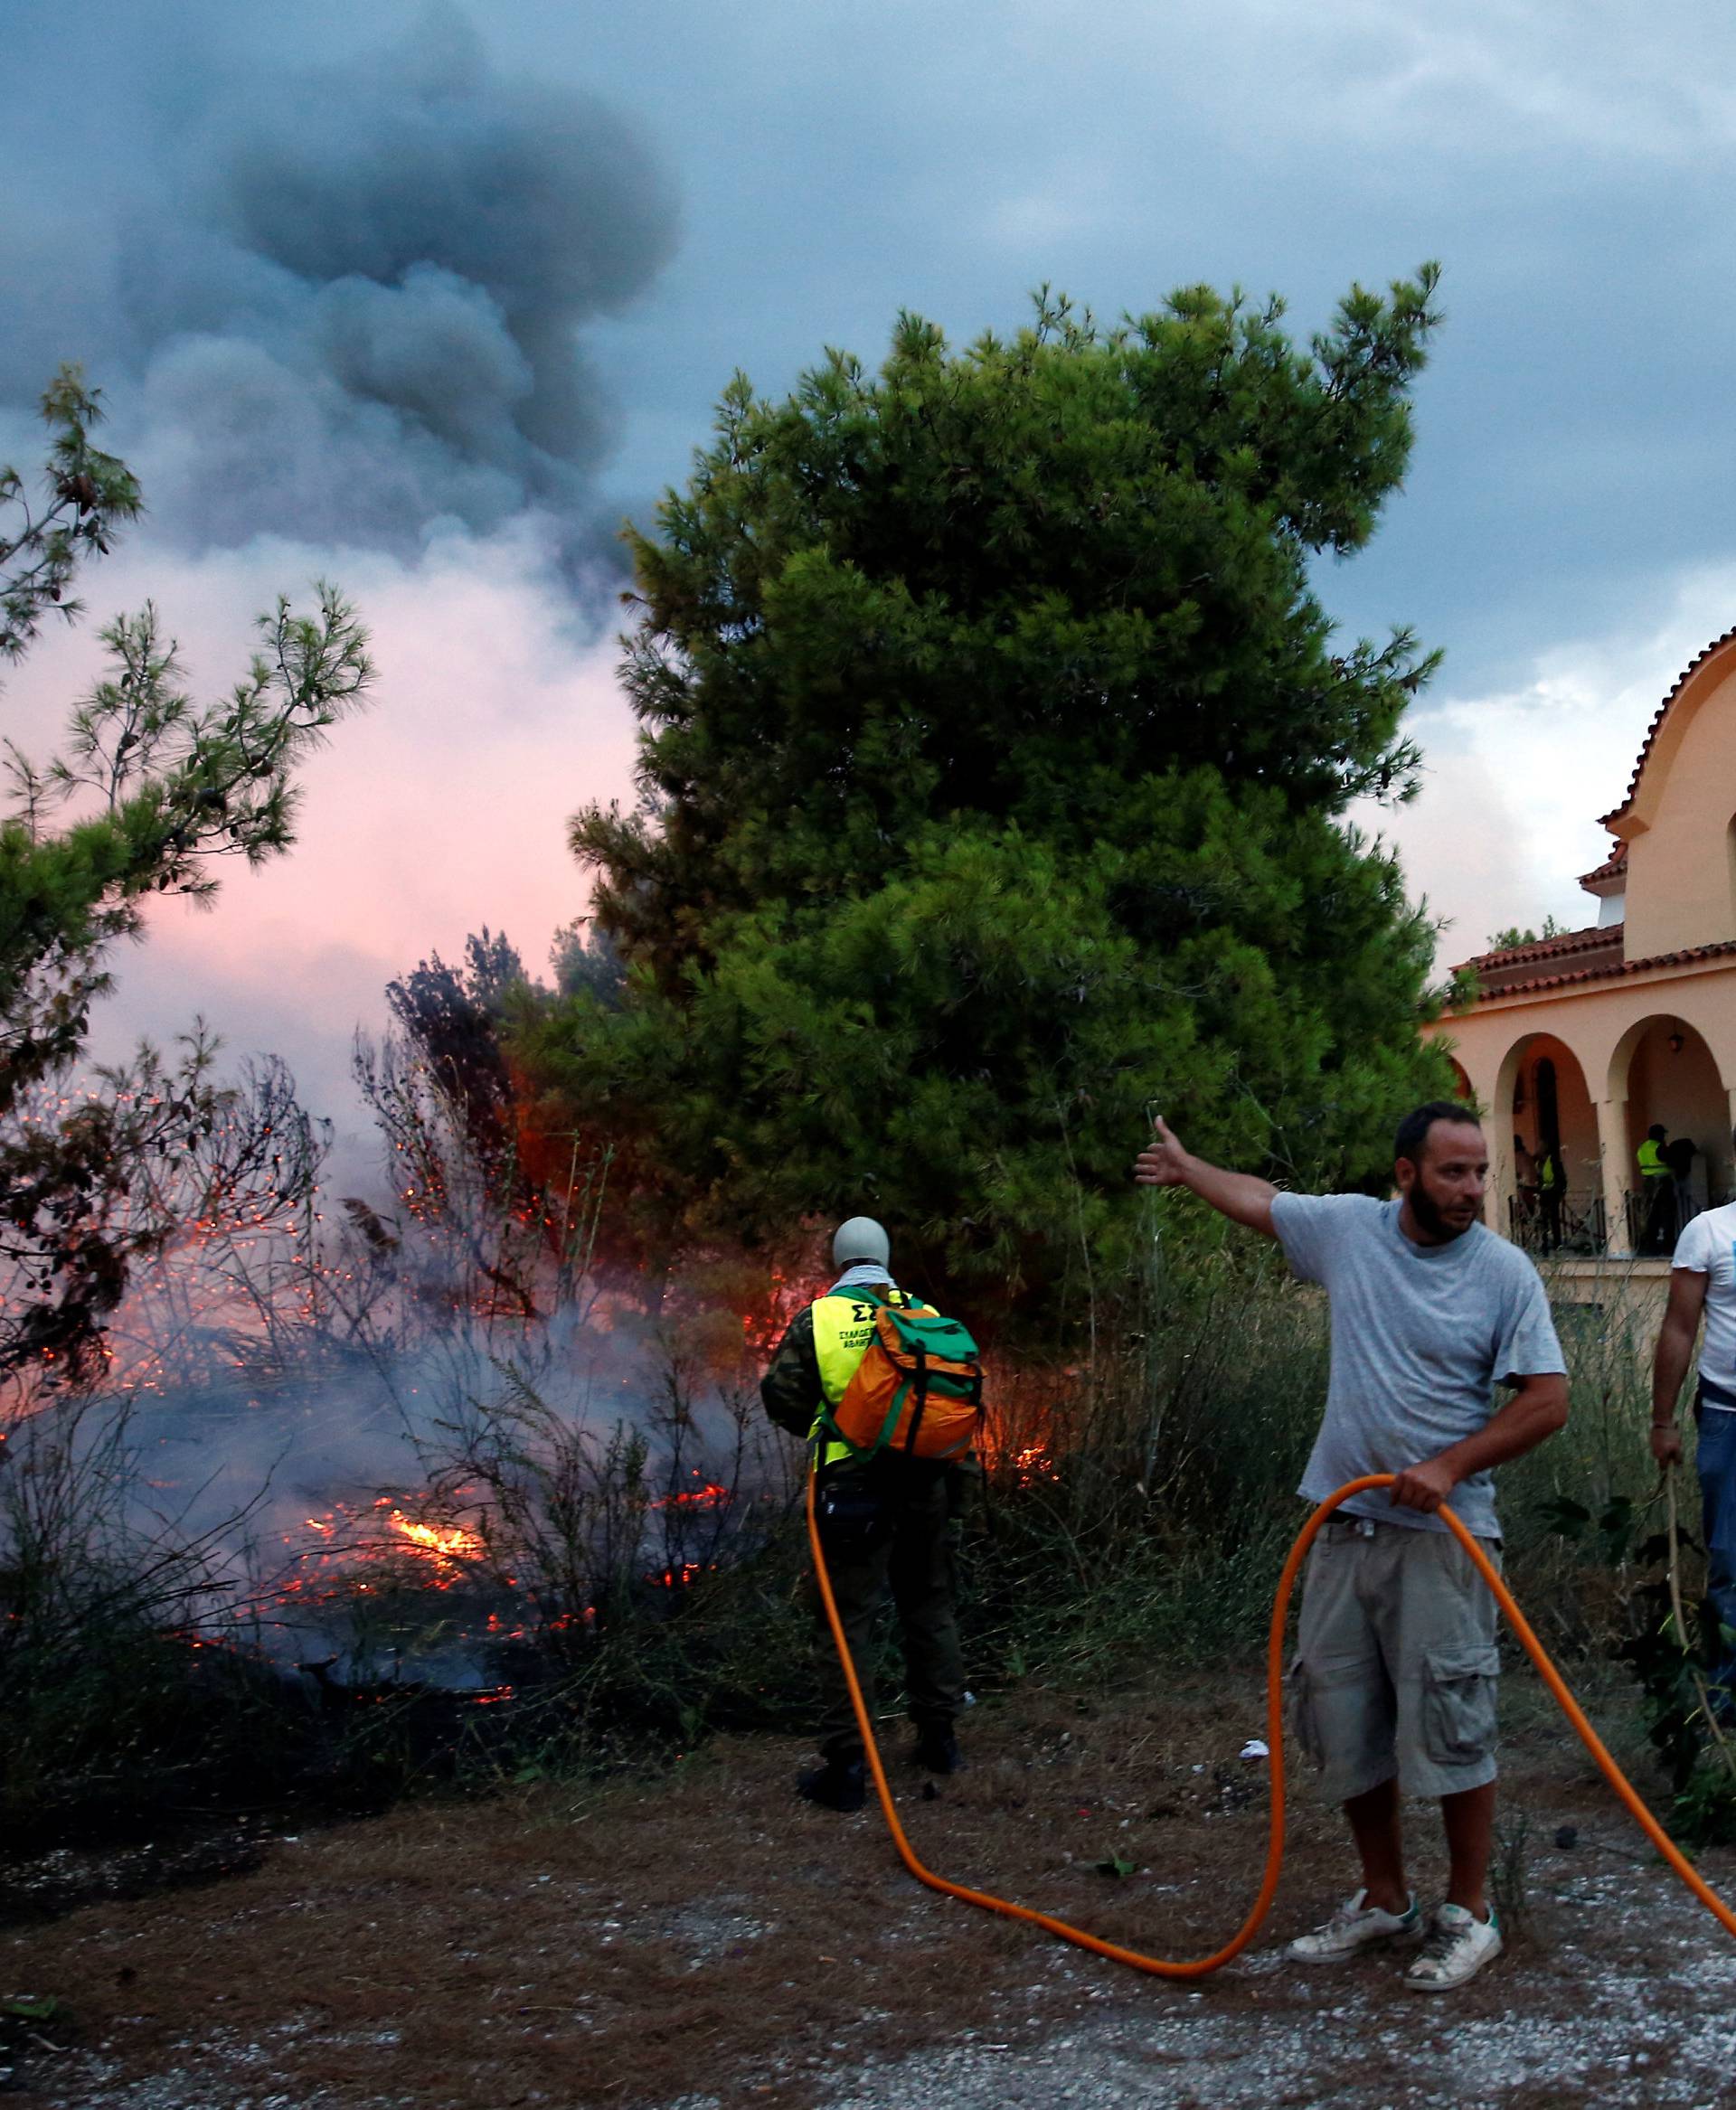 People try to extinguish a wildfire burning next to a church in the town of Rafina, near Athens